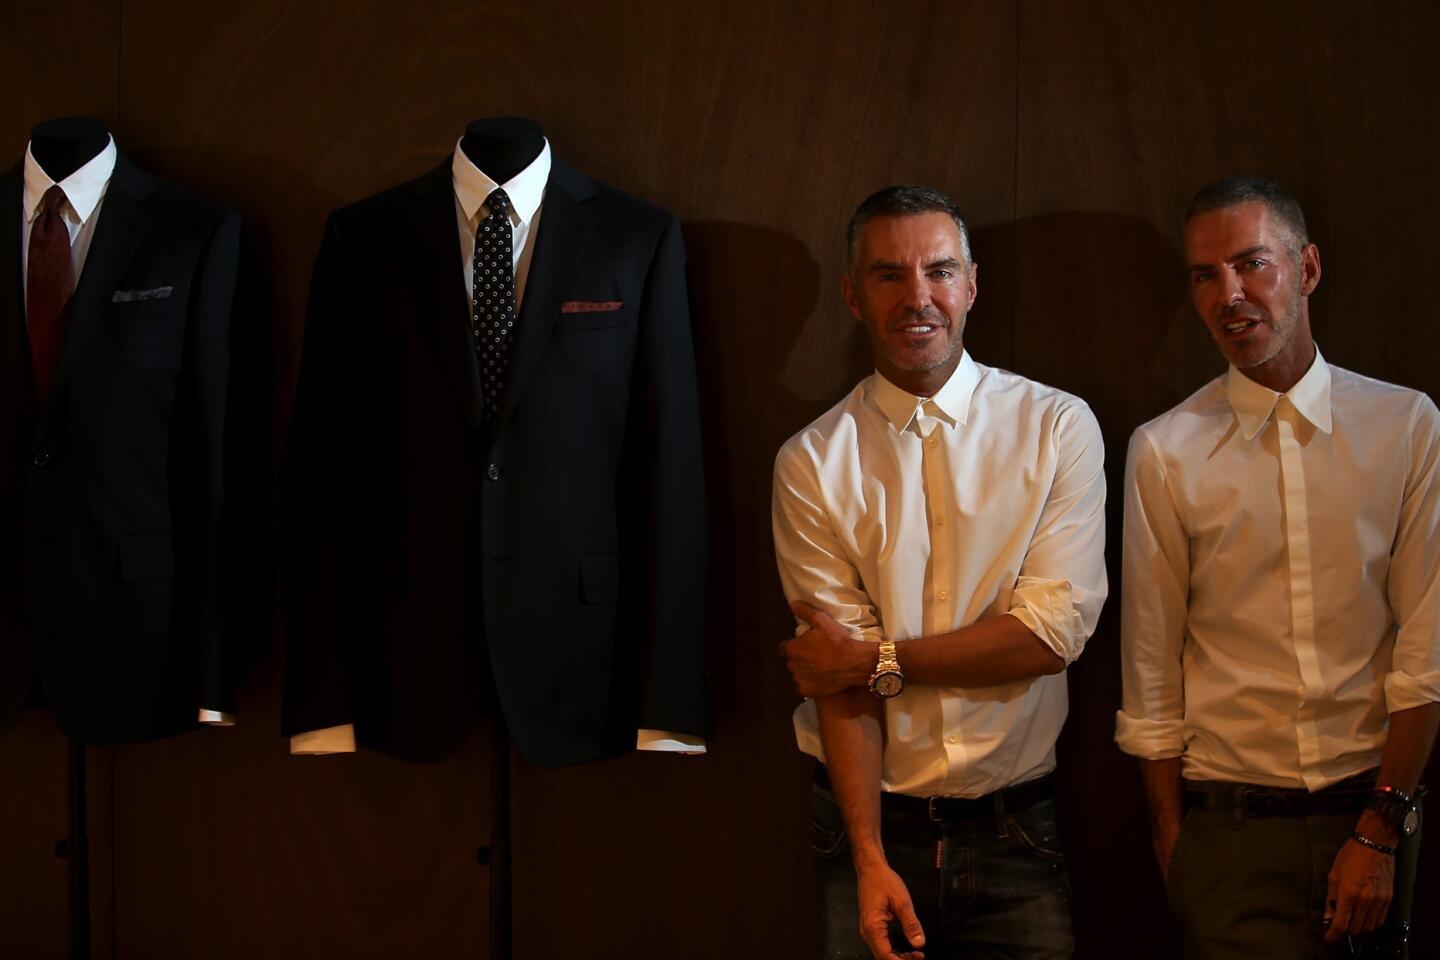 DSquared2 is growing. But is it growing up? Dan and Dean